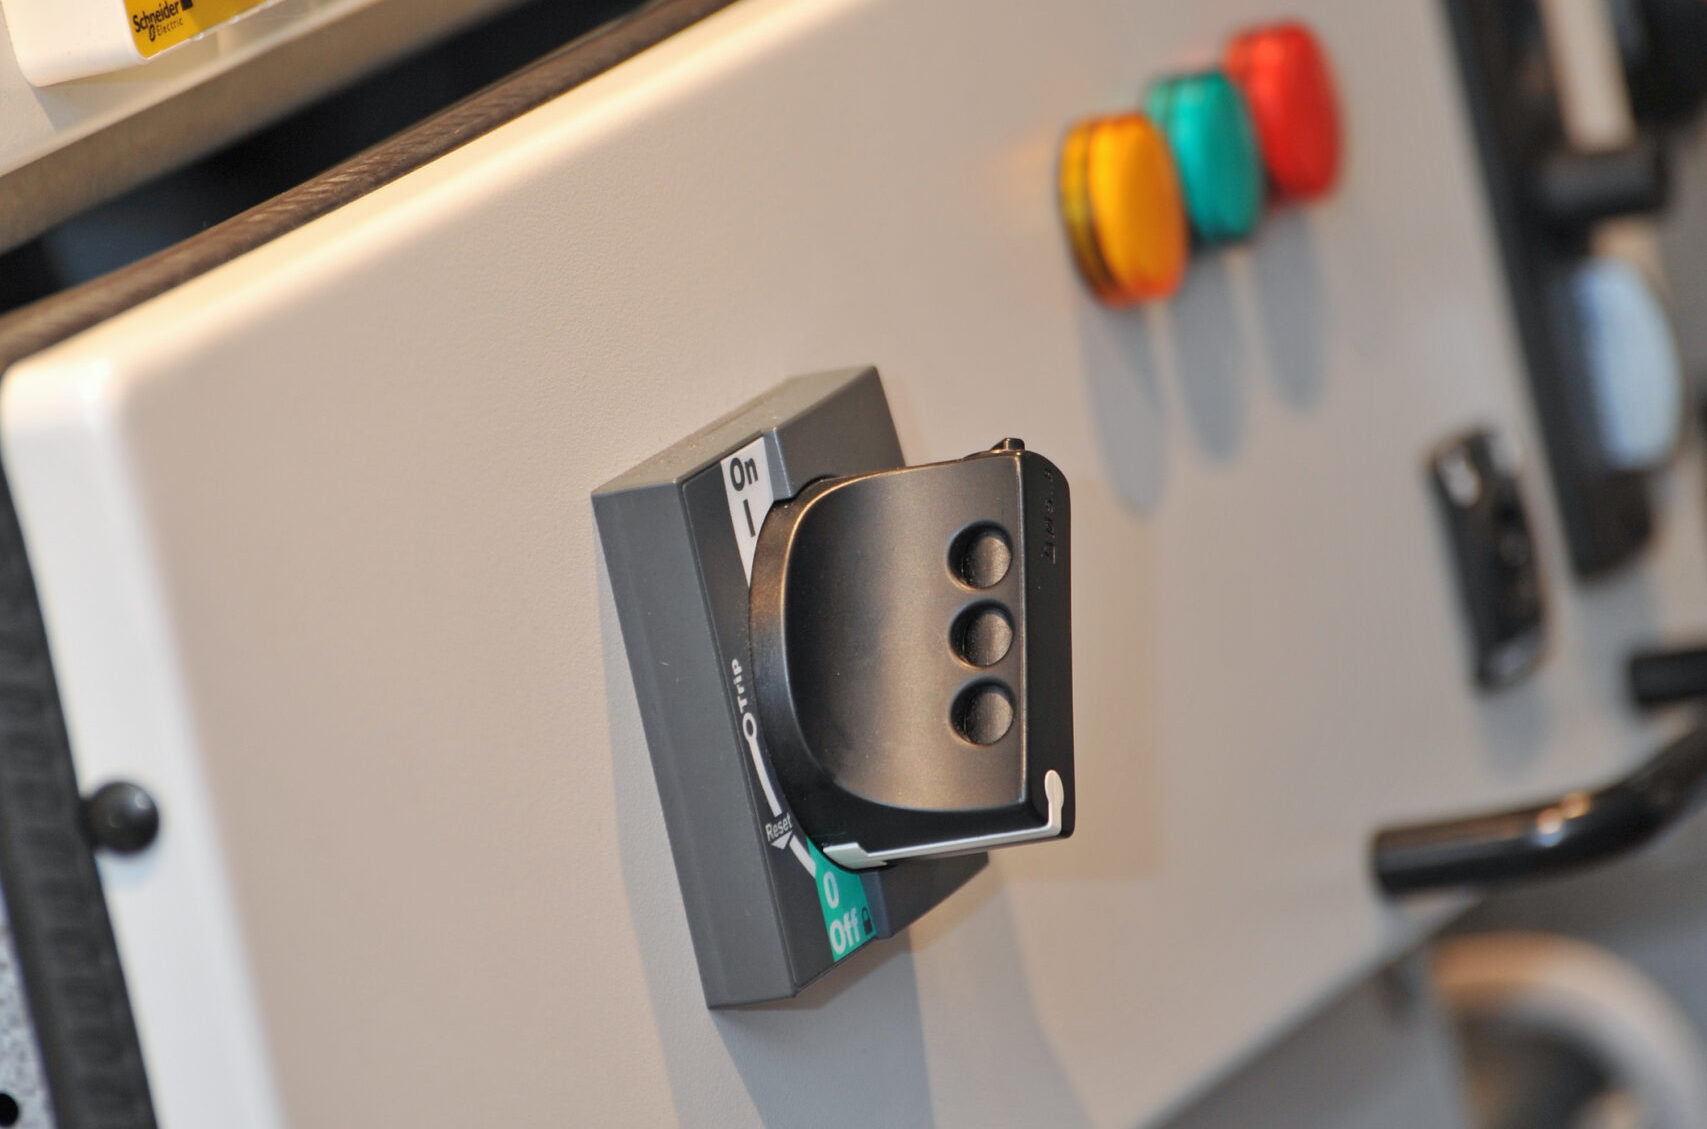 Logstrup low voltage electrical Switchgear components. In particular, Withdrawable units